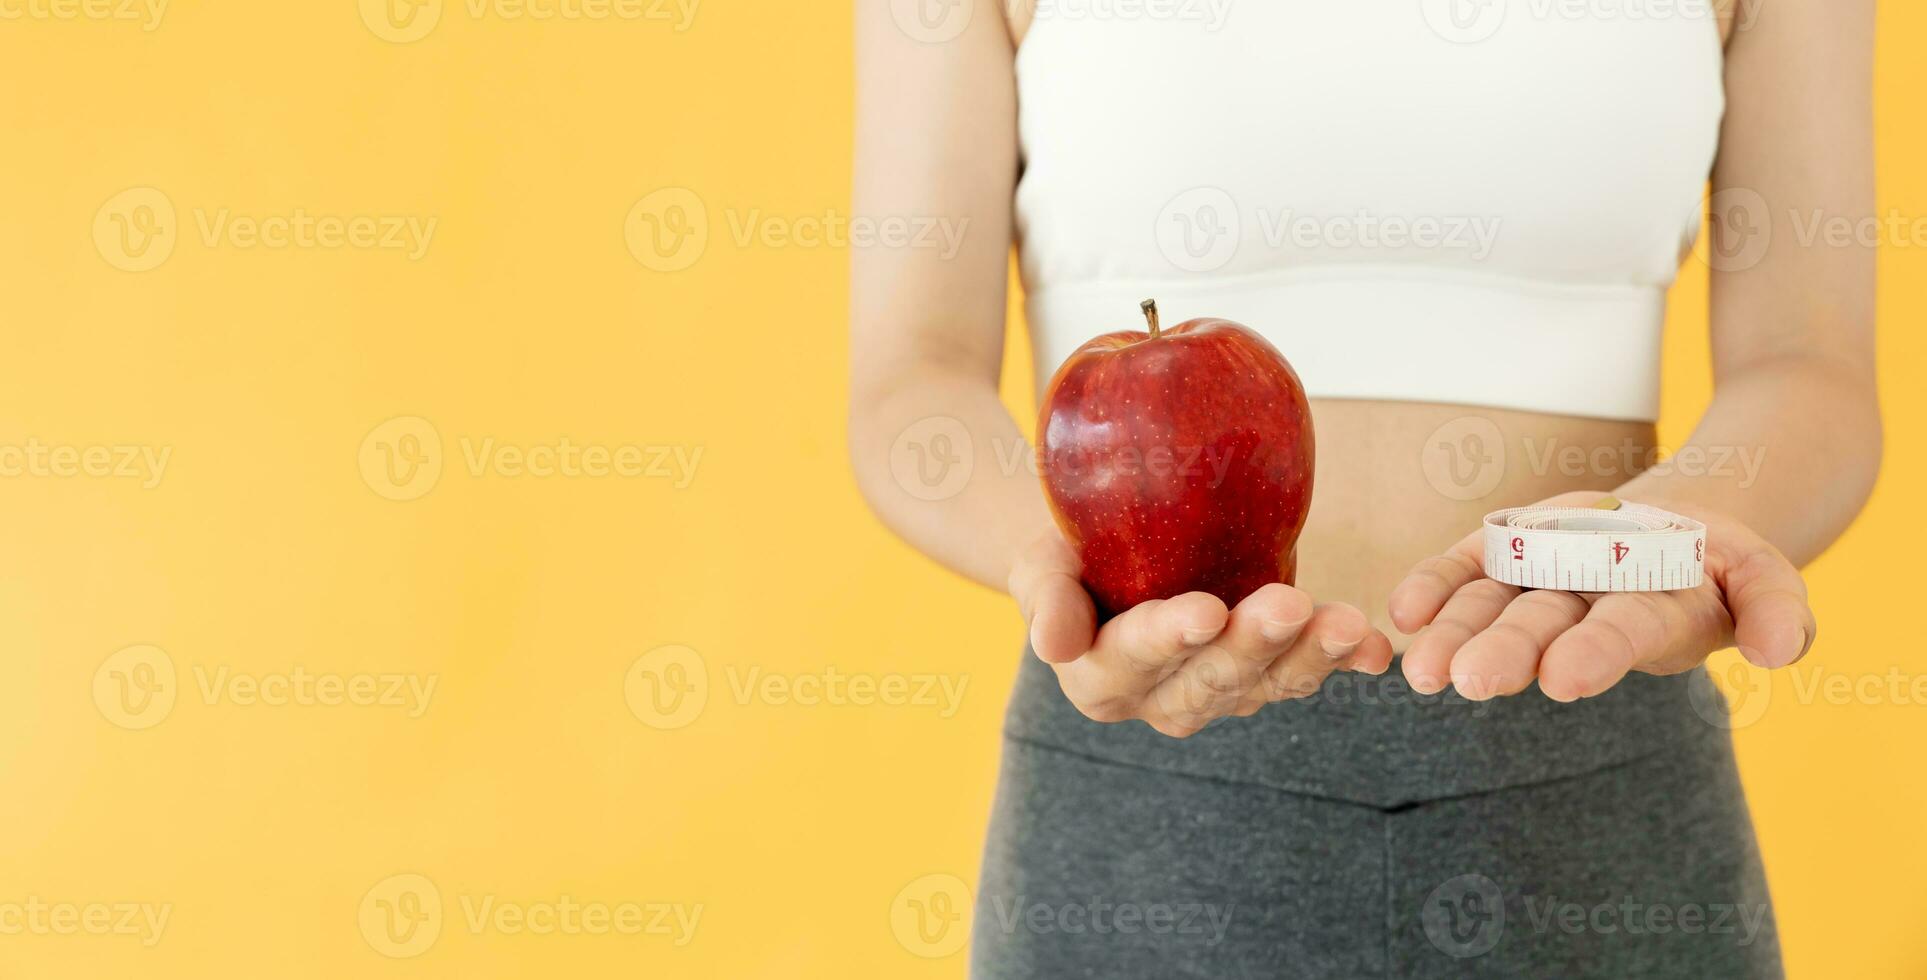 https://static.vecteezy.com/system/resources/previews/028/660/072/non_2x/slim-body-asian-women-choose-healthy-foods-dieting-female-choose-red-apple-for-diet-good-healthy-food-weight-lose-balance-control-reduce-fat-low-calories-routines-exercise-body-shape-photo.jpg